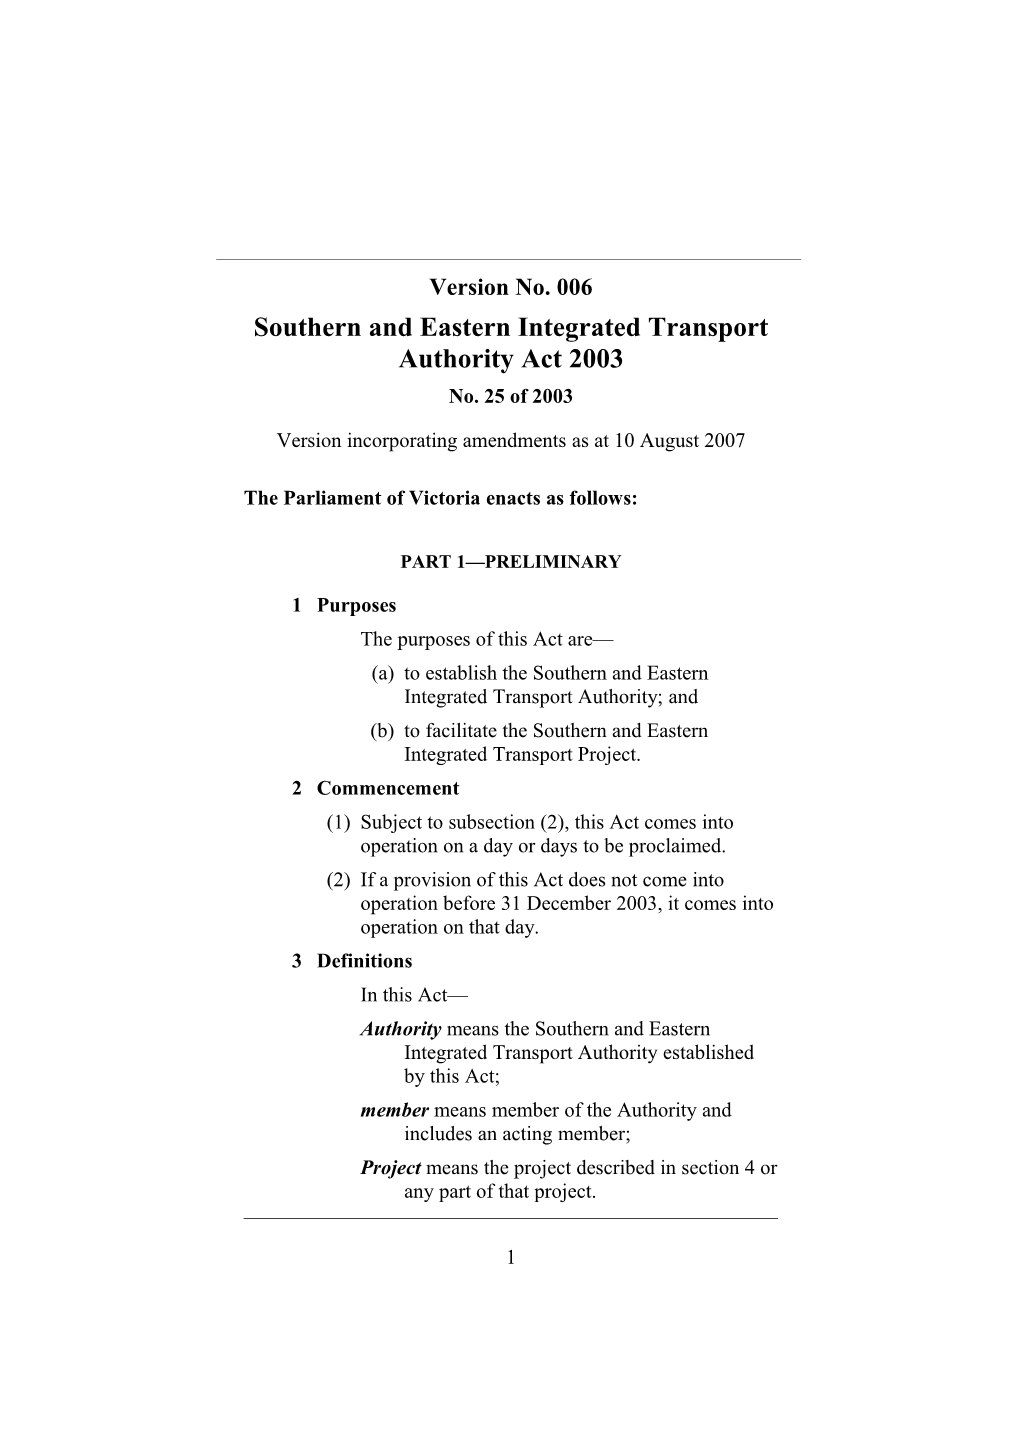 Southern and Eastern Integrated Transport Authority Act 2003